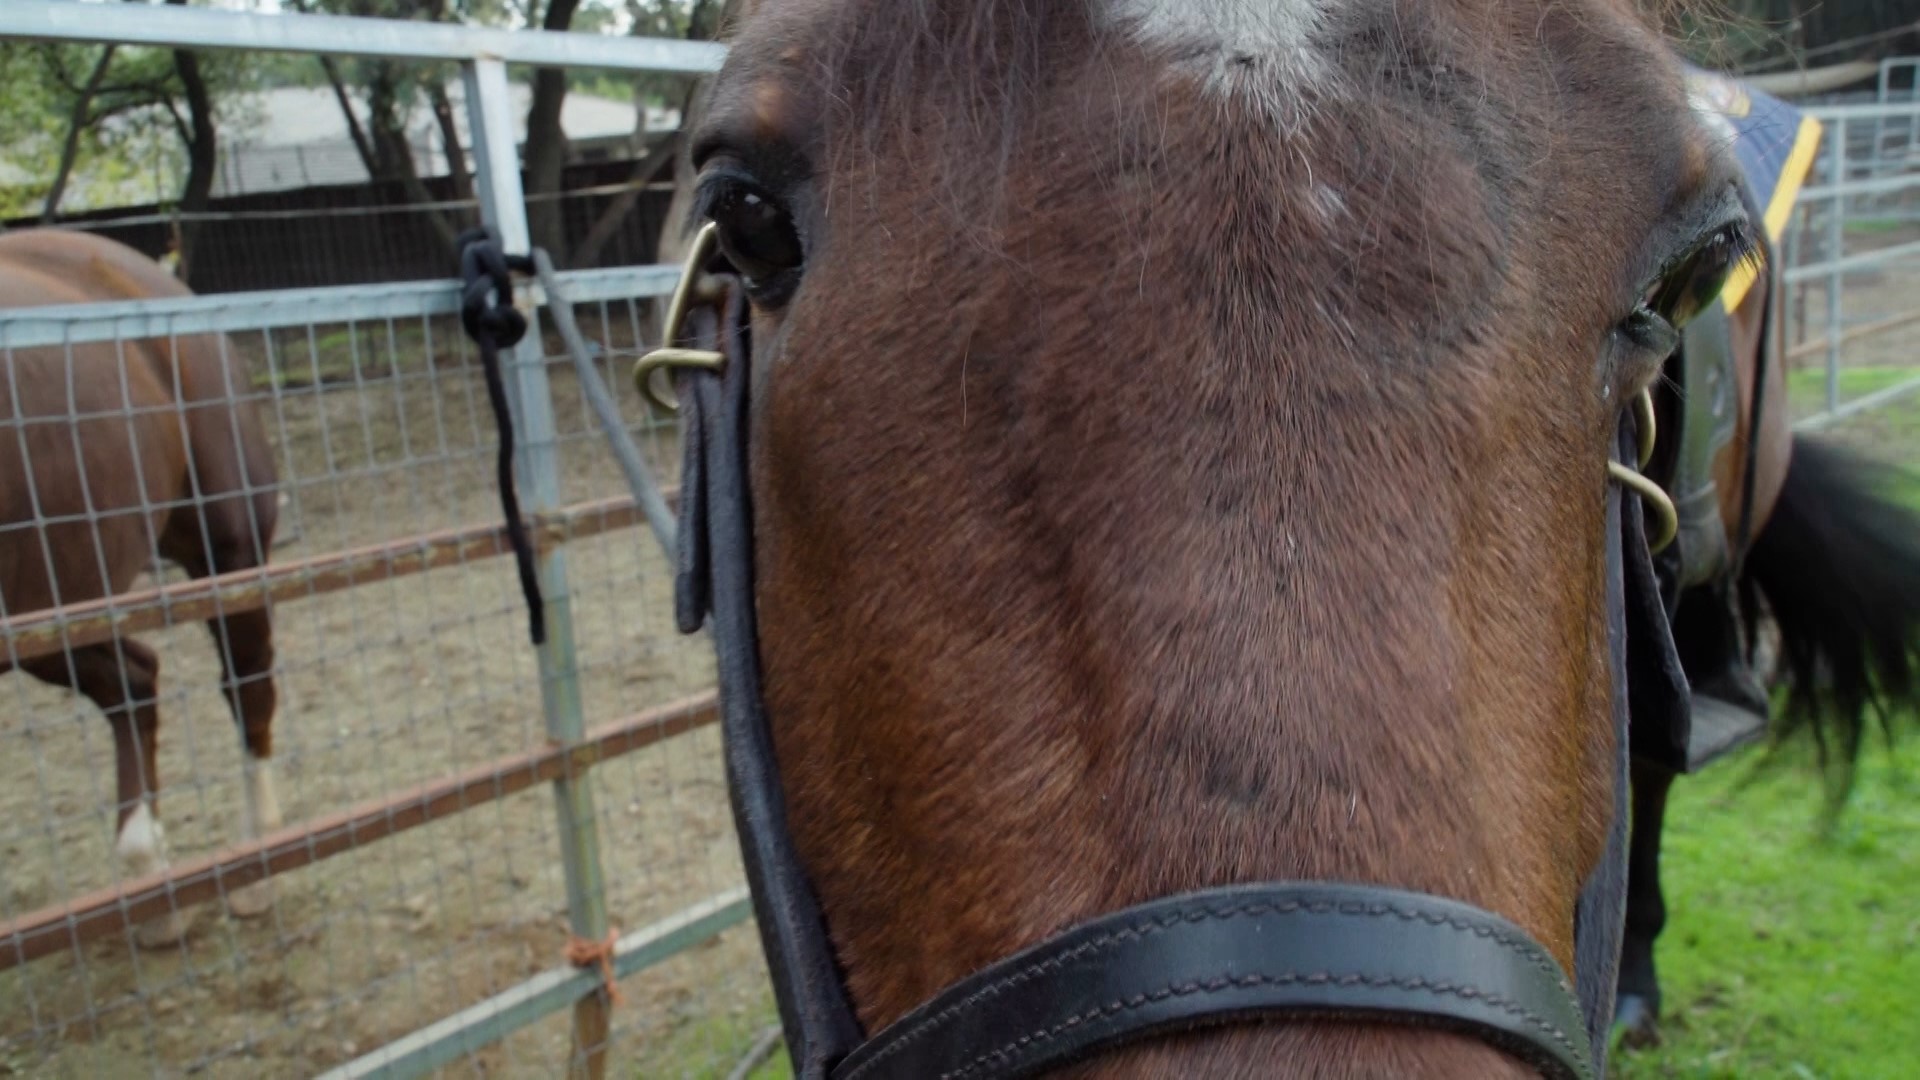 Ace, a 15-year-old quarter horse, is back in service after All About Equine performed a surgery that saved his vision.